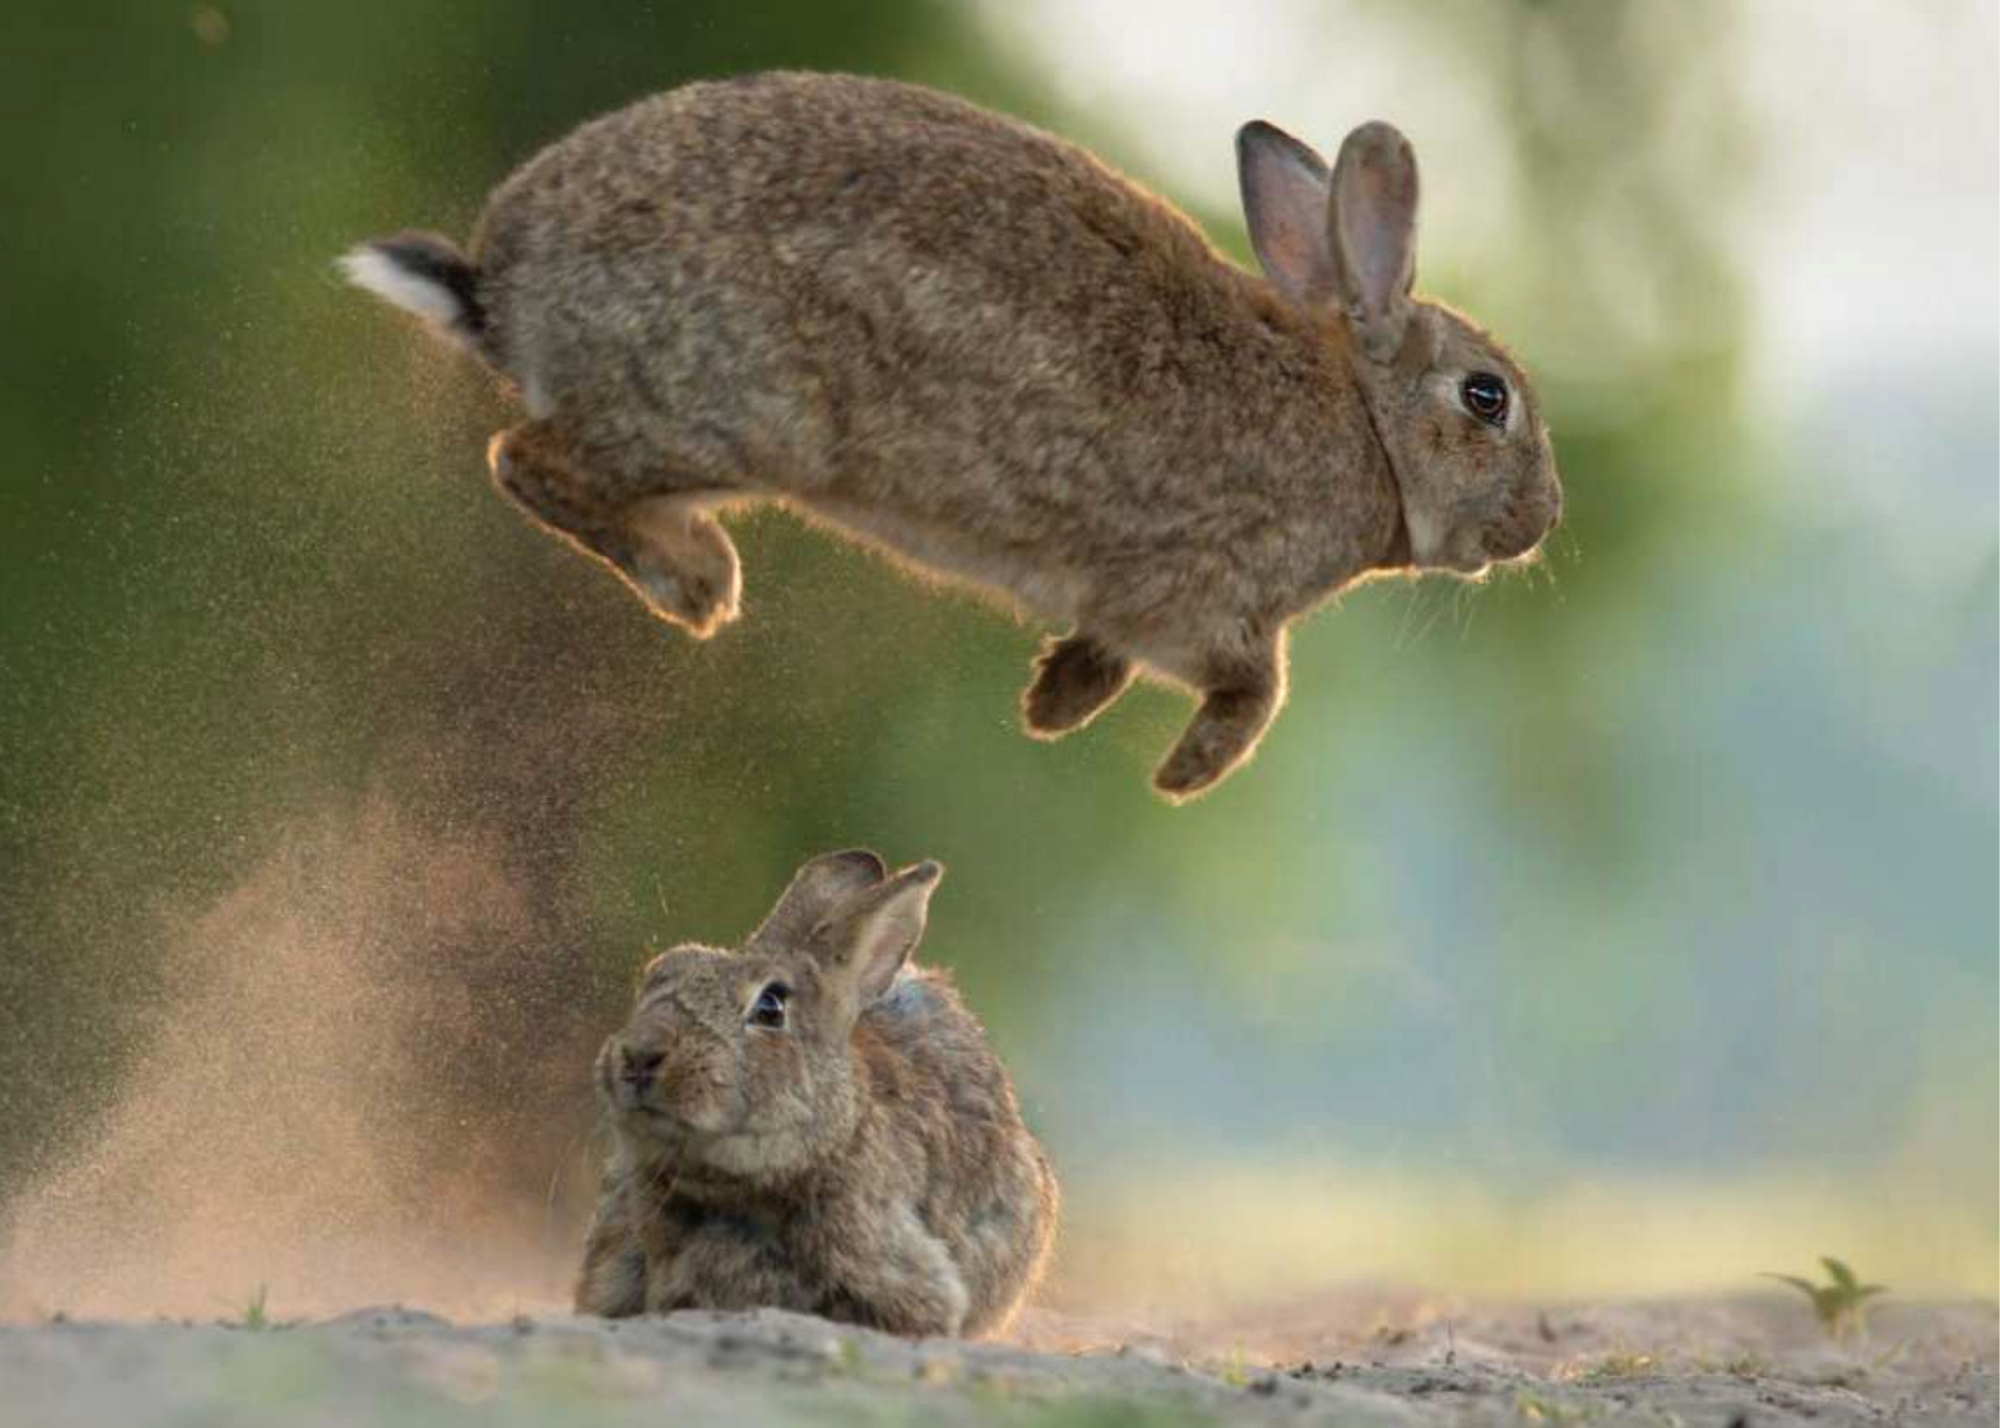 A brown-colored rabbit rests in the sand, watching its pal jump into the air